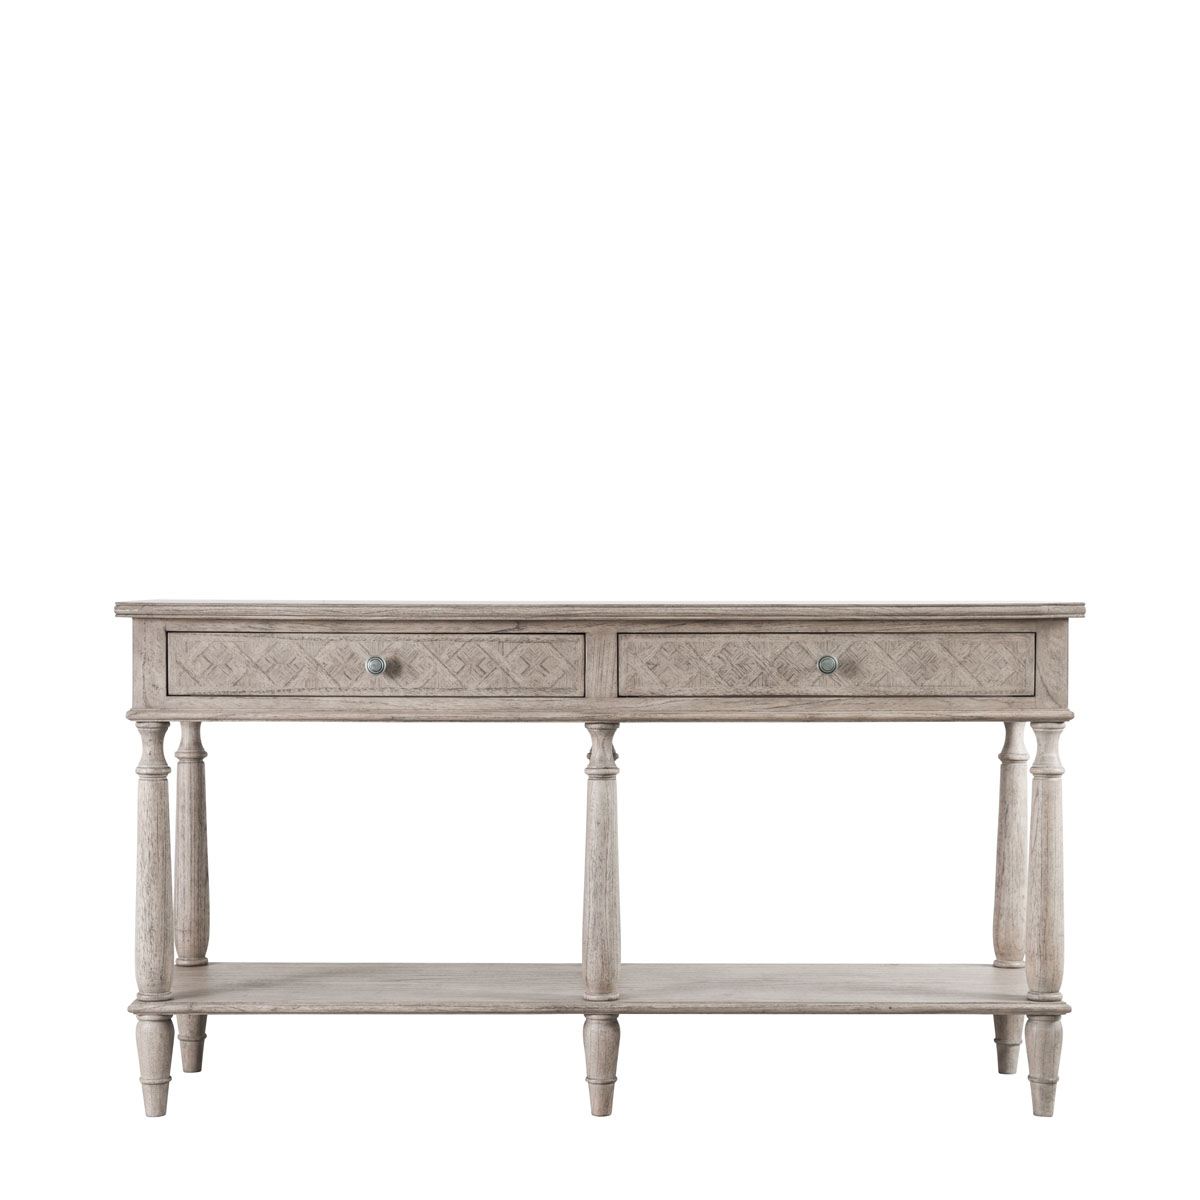 Mustique 2 Drawer Console Table 1500x450x800mm